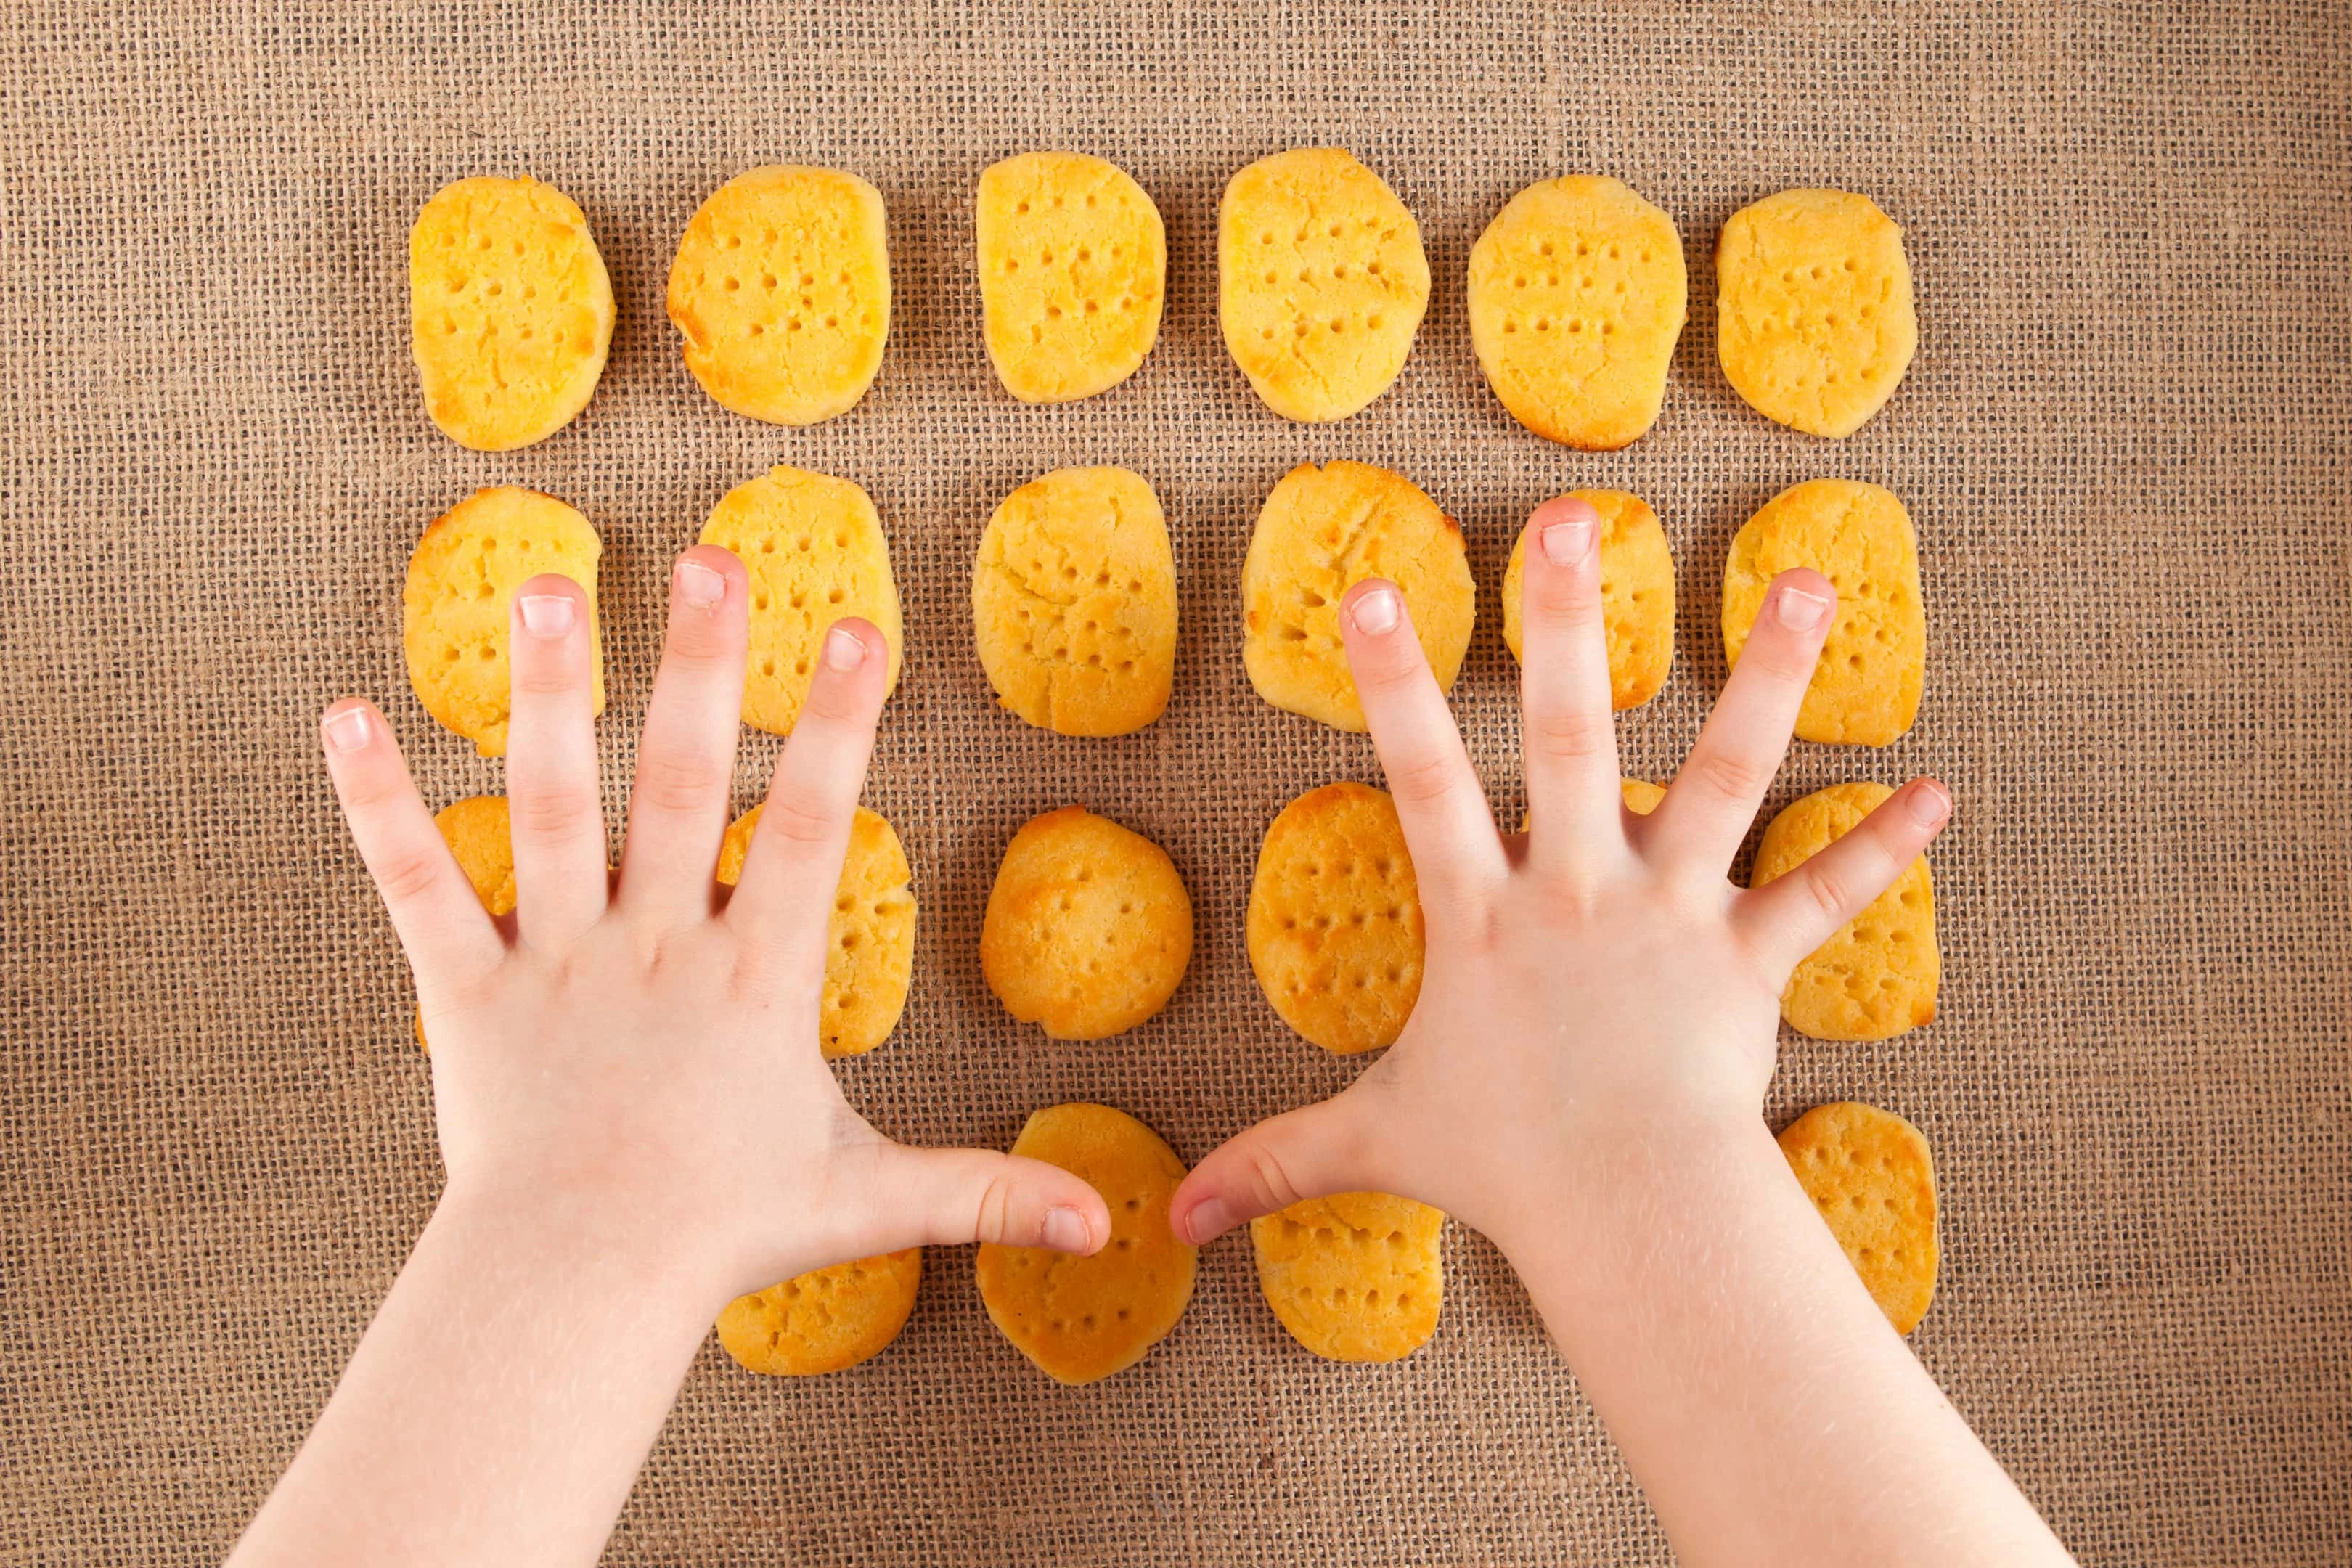 Child's hands reach for Chickpea Flour Biscuits - Vegan and Gluten-Free.